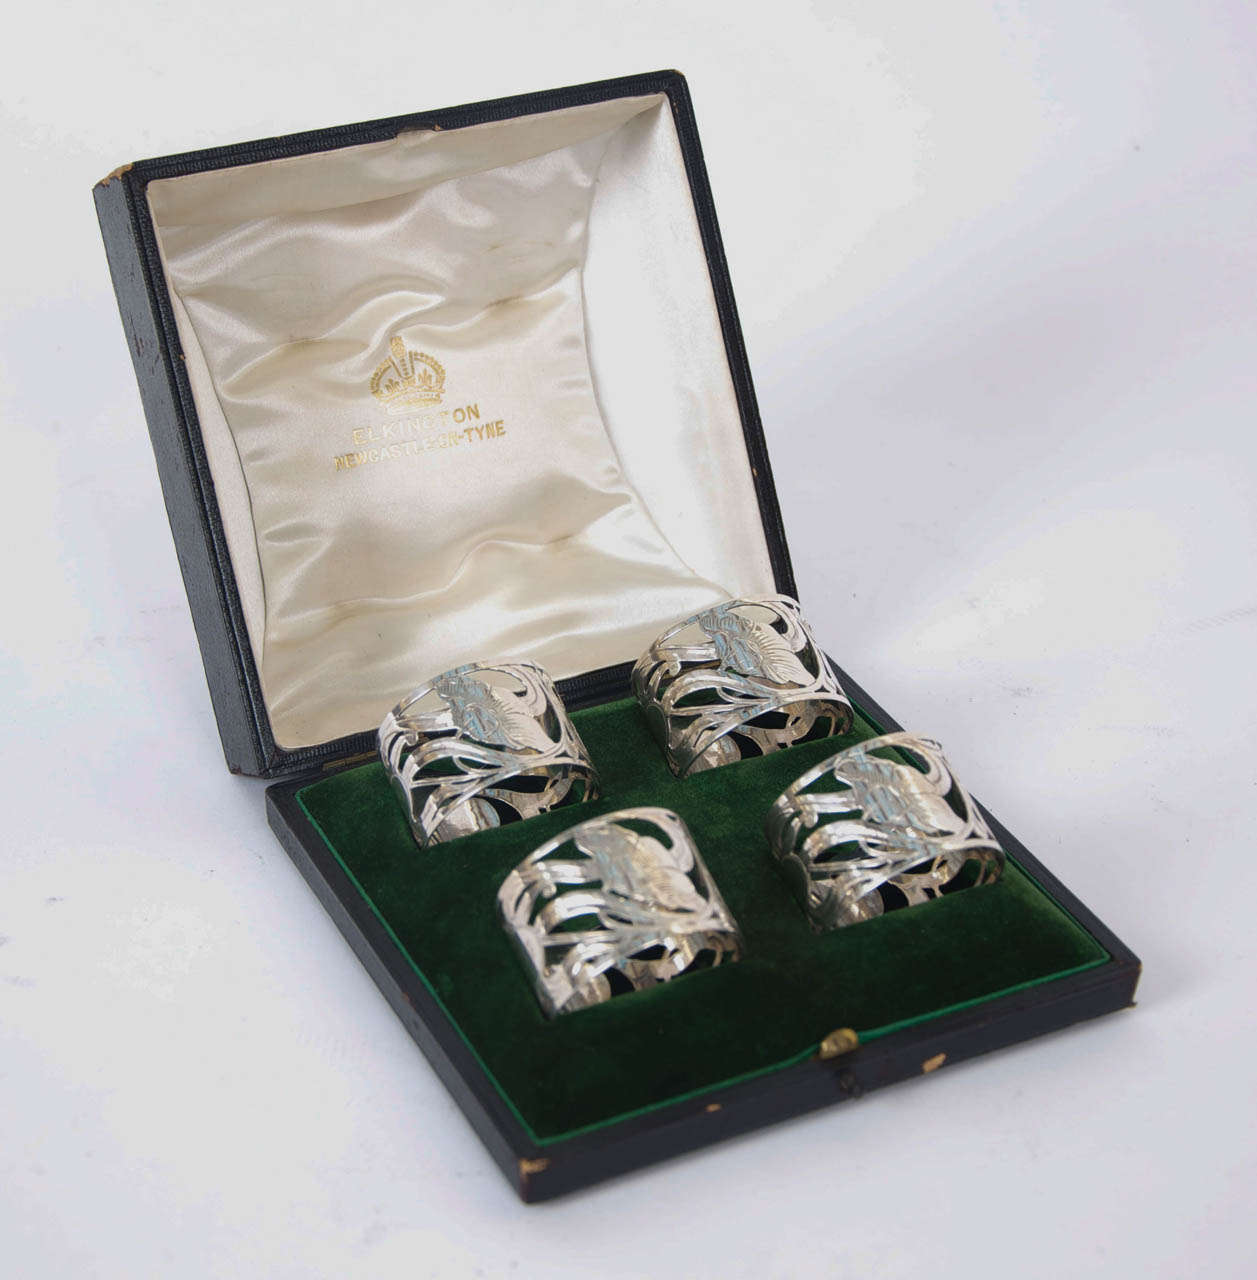 This is a lovely set of 4 sterling silver napkin rings pierced with a sinuous Art Nouveau floral design. The rings were made by the leading British silversmiths Elkington & Co and are hallmarked for Birmingham 1902. They are cased in their original